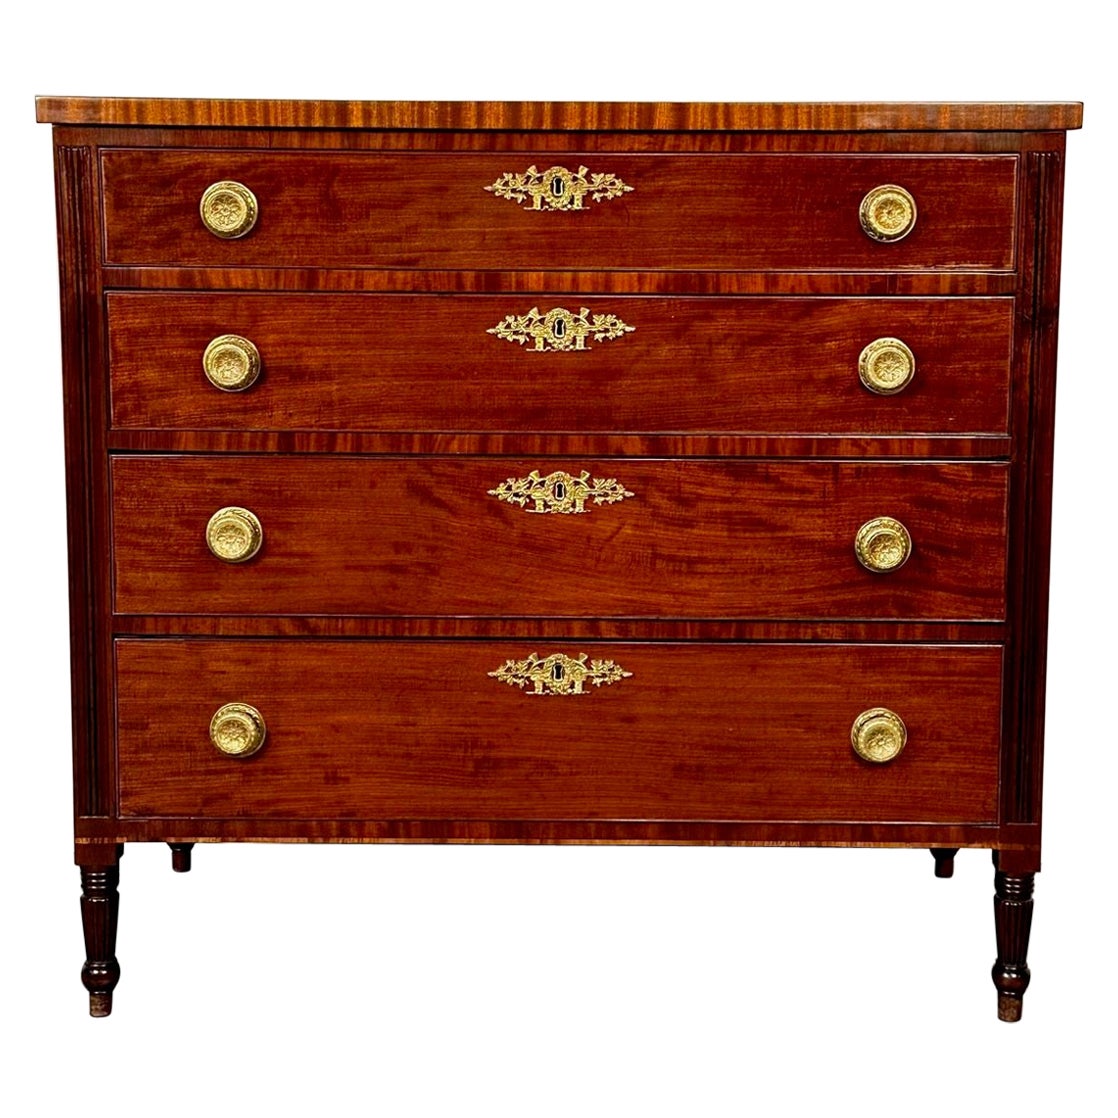 Polished 18th/19th Century Mahogany Chest, Dresser or Commode, Bronze Accents